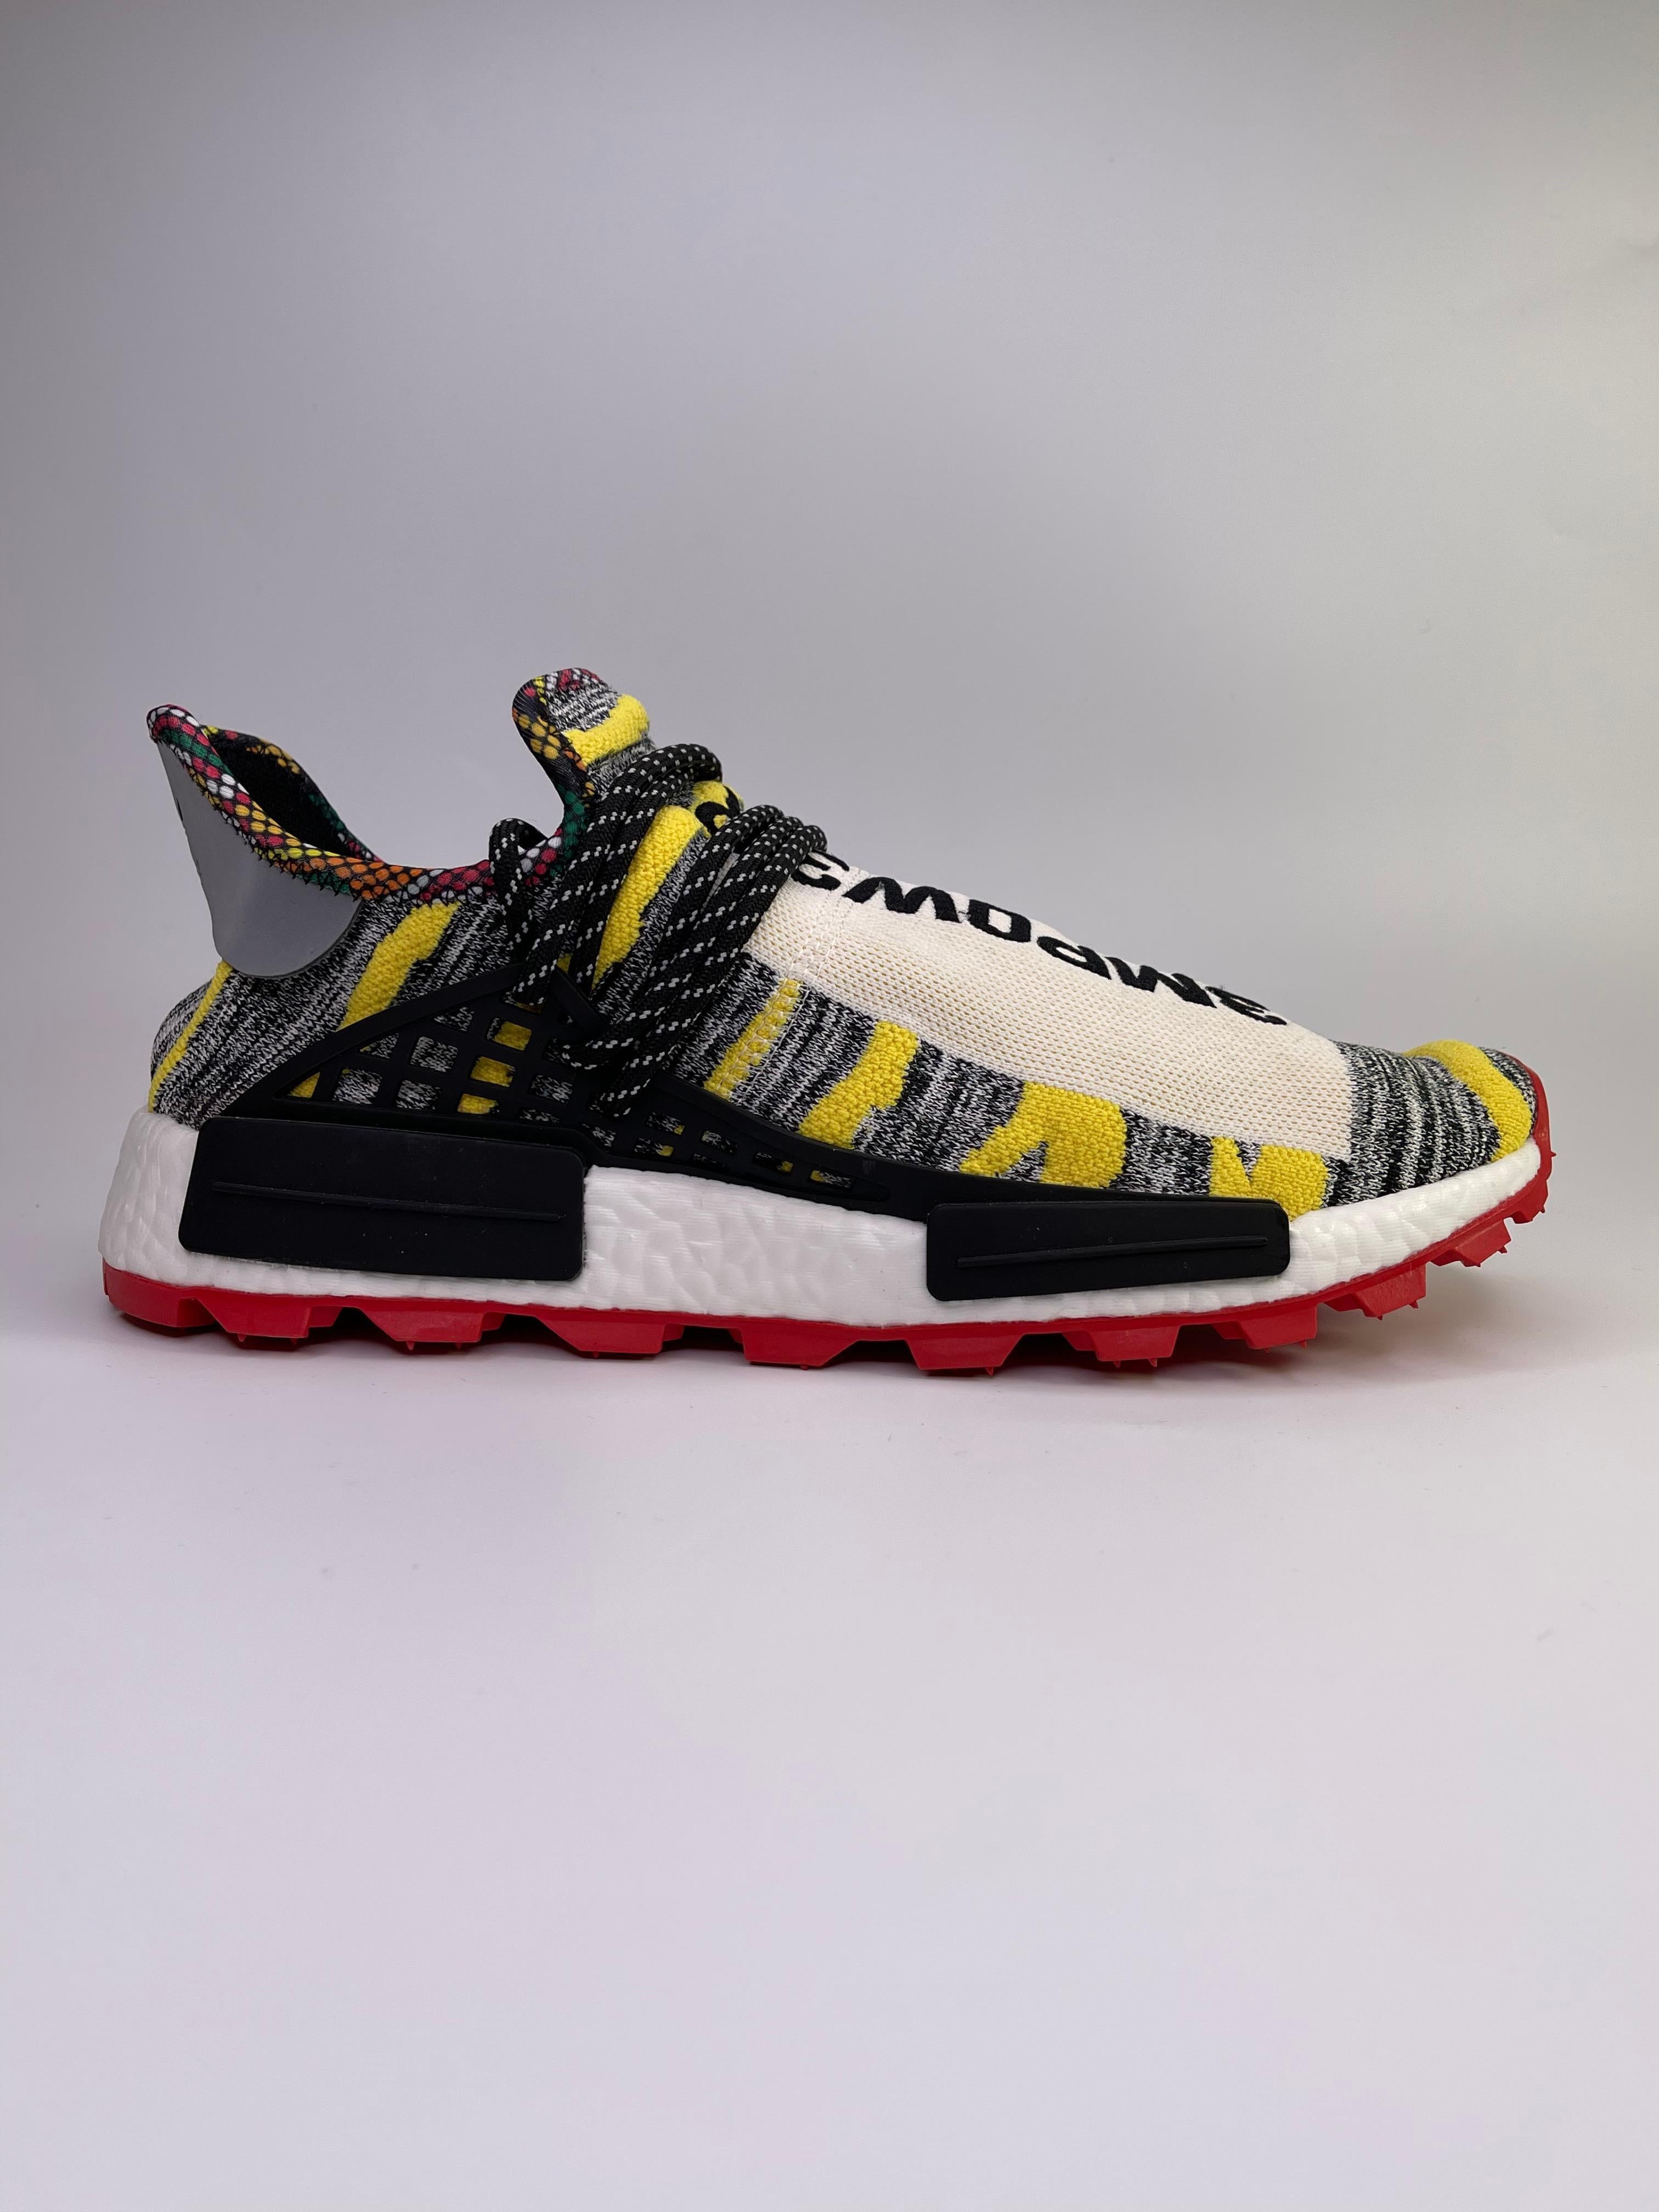 Adidas Pharrell x NMD Human Race Solar Pack Sneakers (10 US) Mens For Sale 4